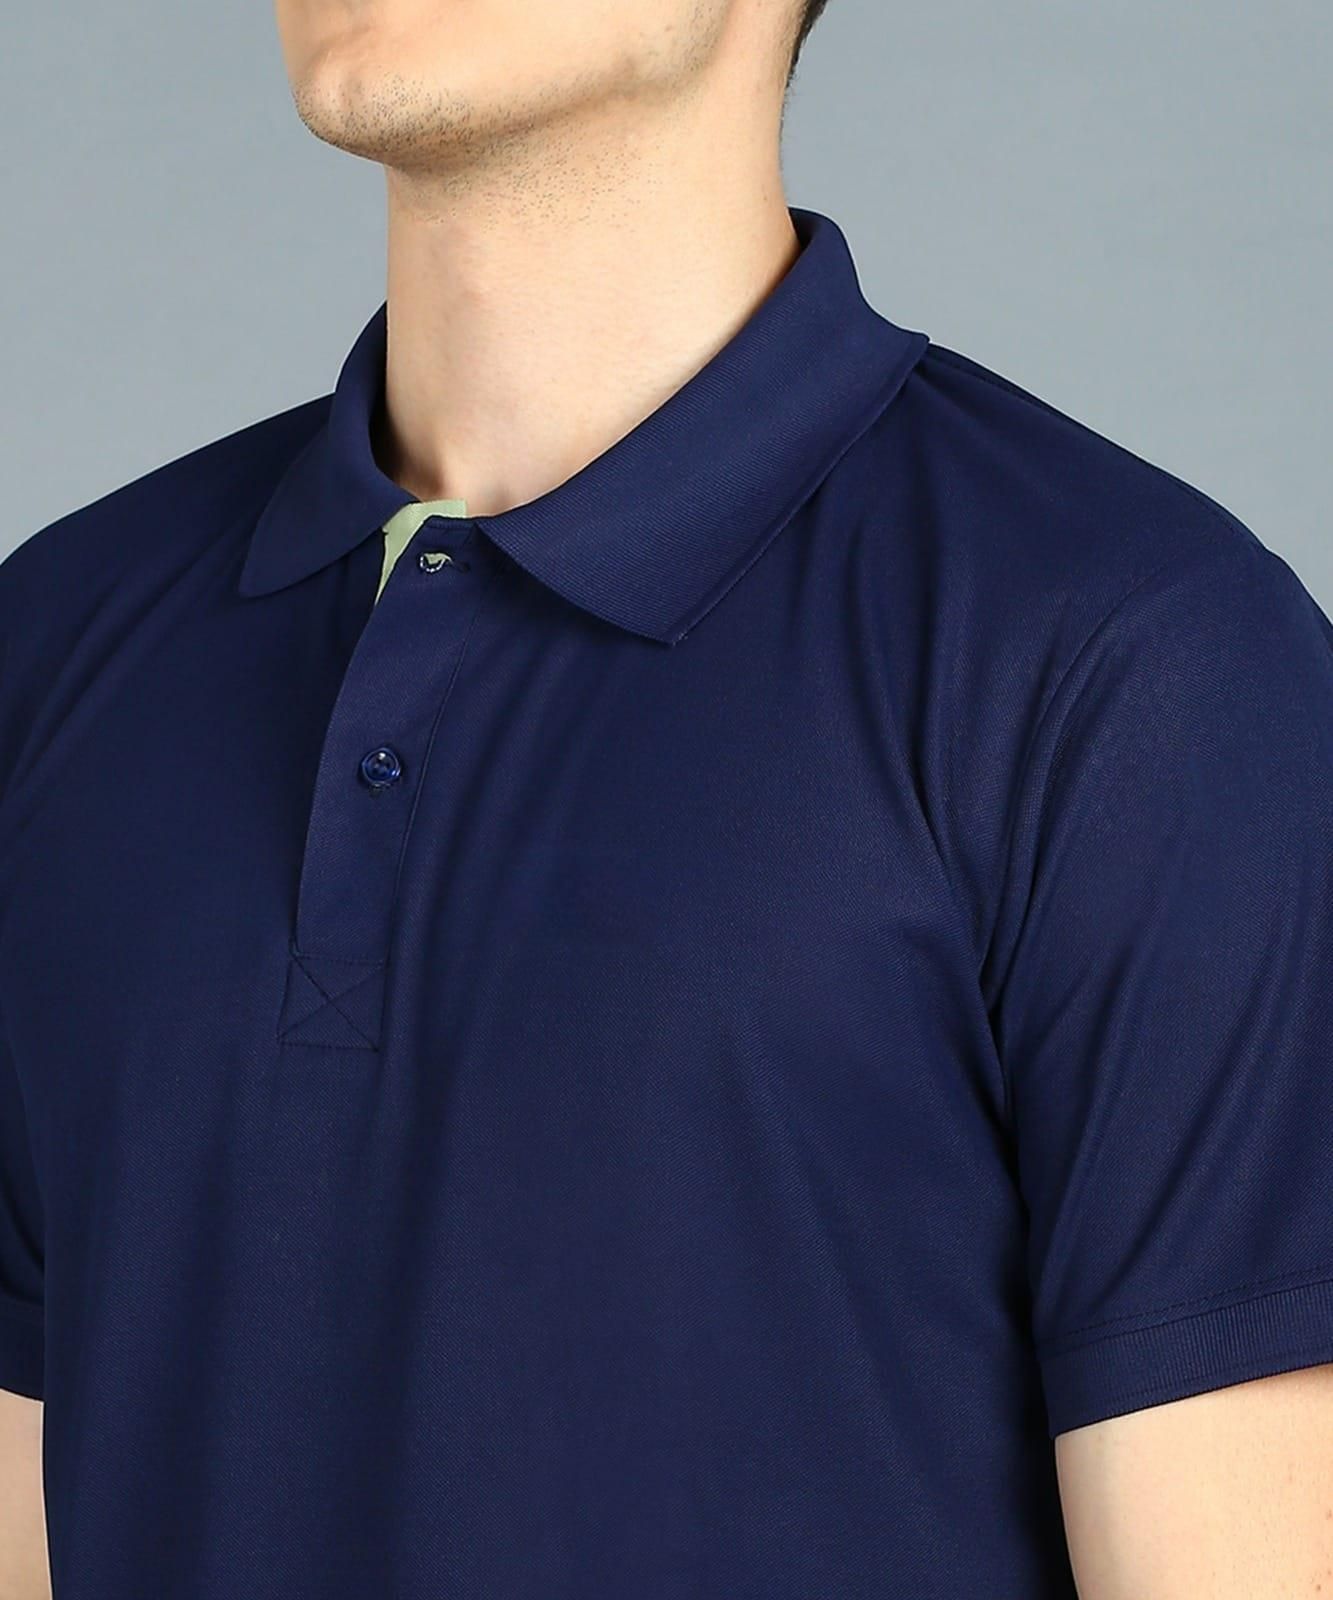 Poly Matte Solid Half Sleeves Mens Polo T-Shirt